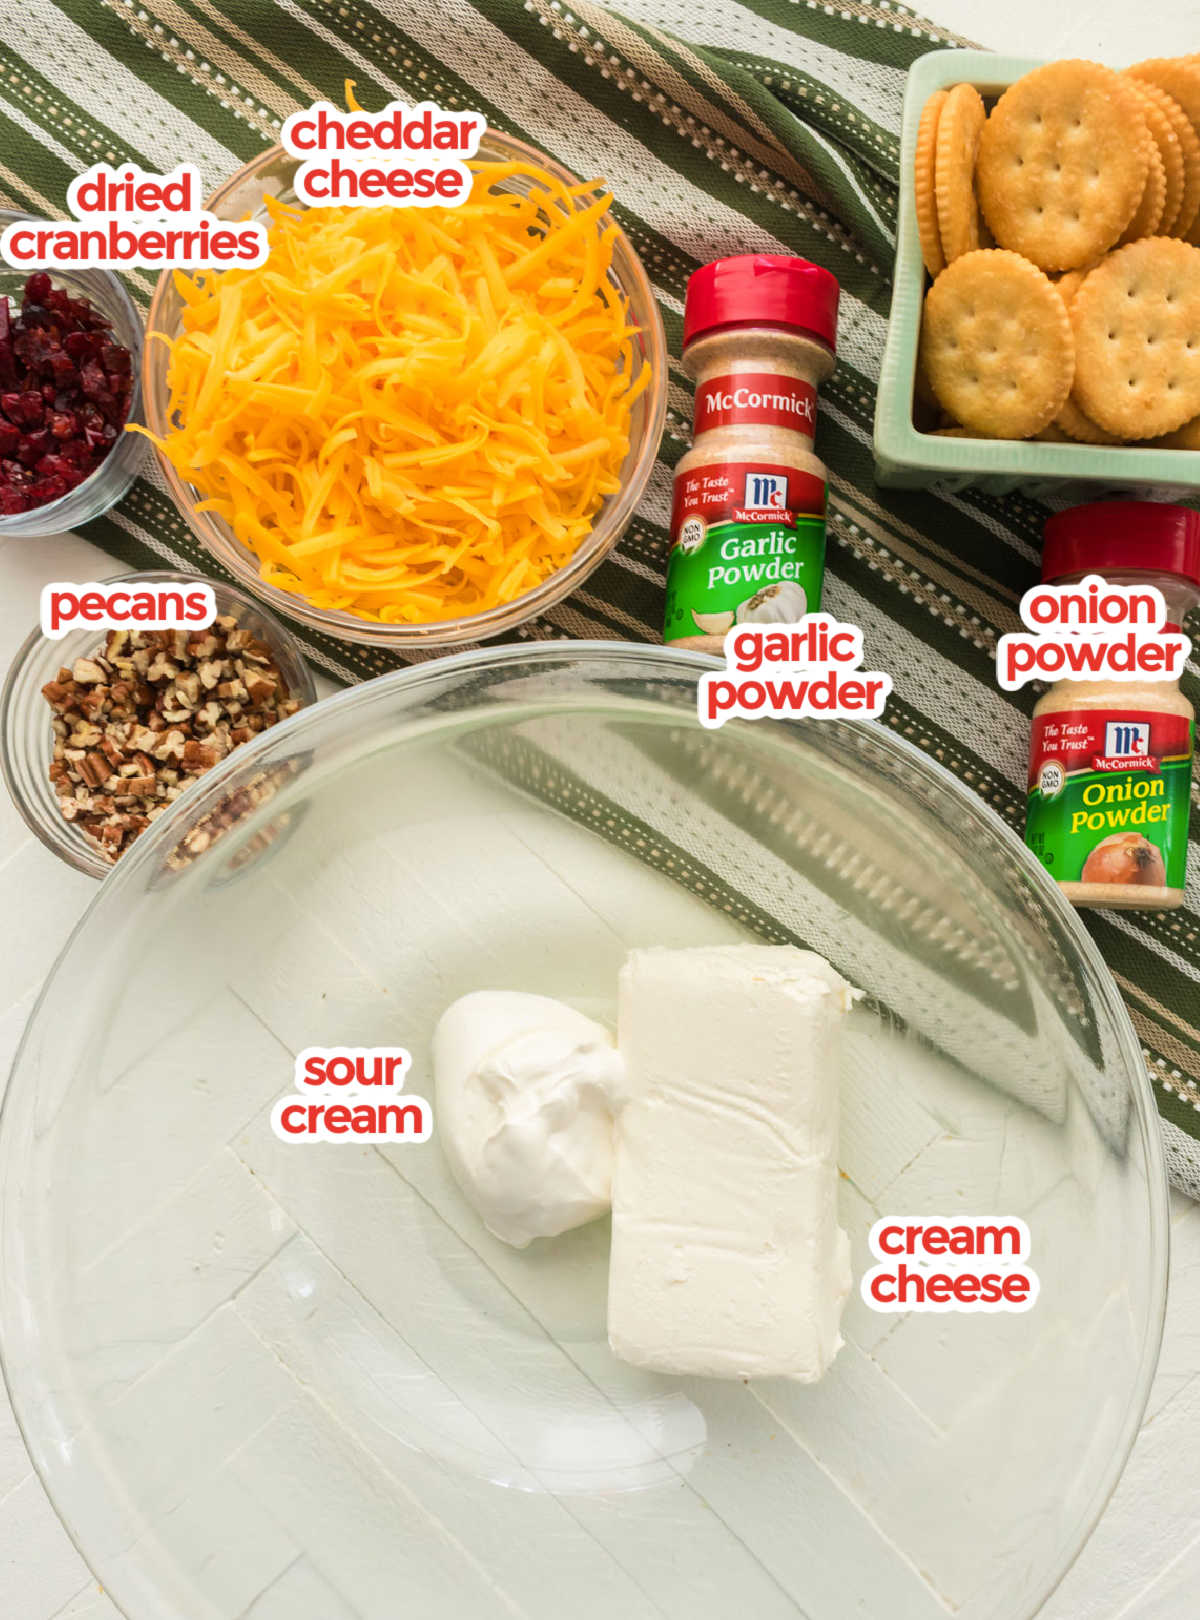 Showing all the ingredients needed to make Cheese Balls including Cream Cheese, Shredded Cheese, Pecans and Dried Cranberries.